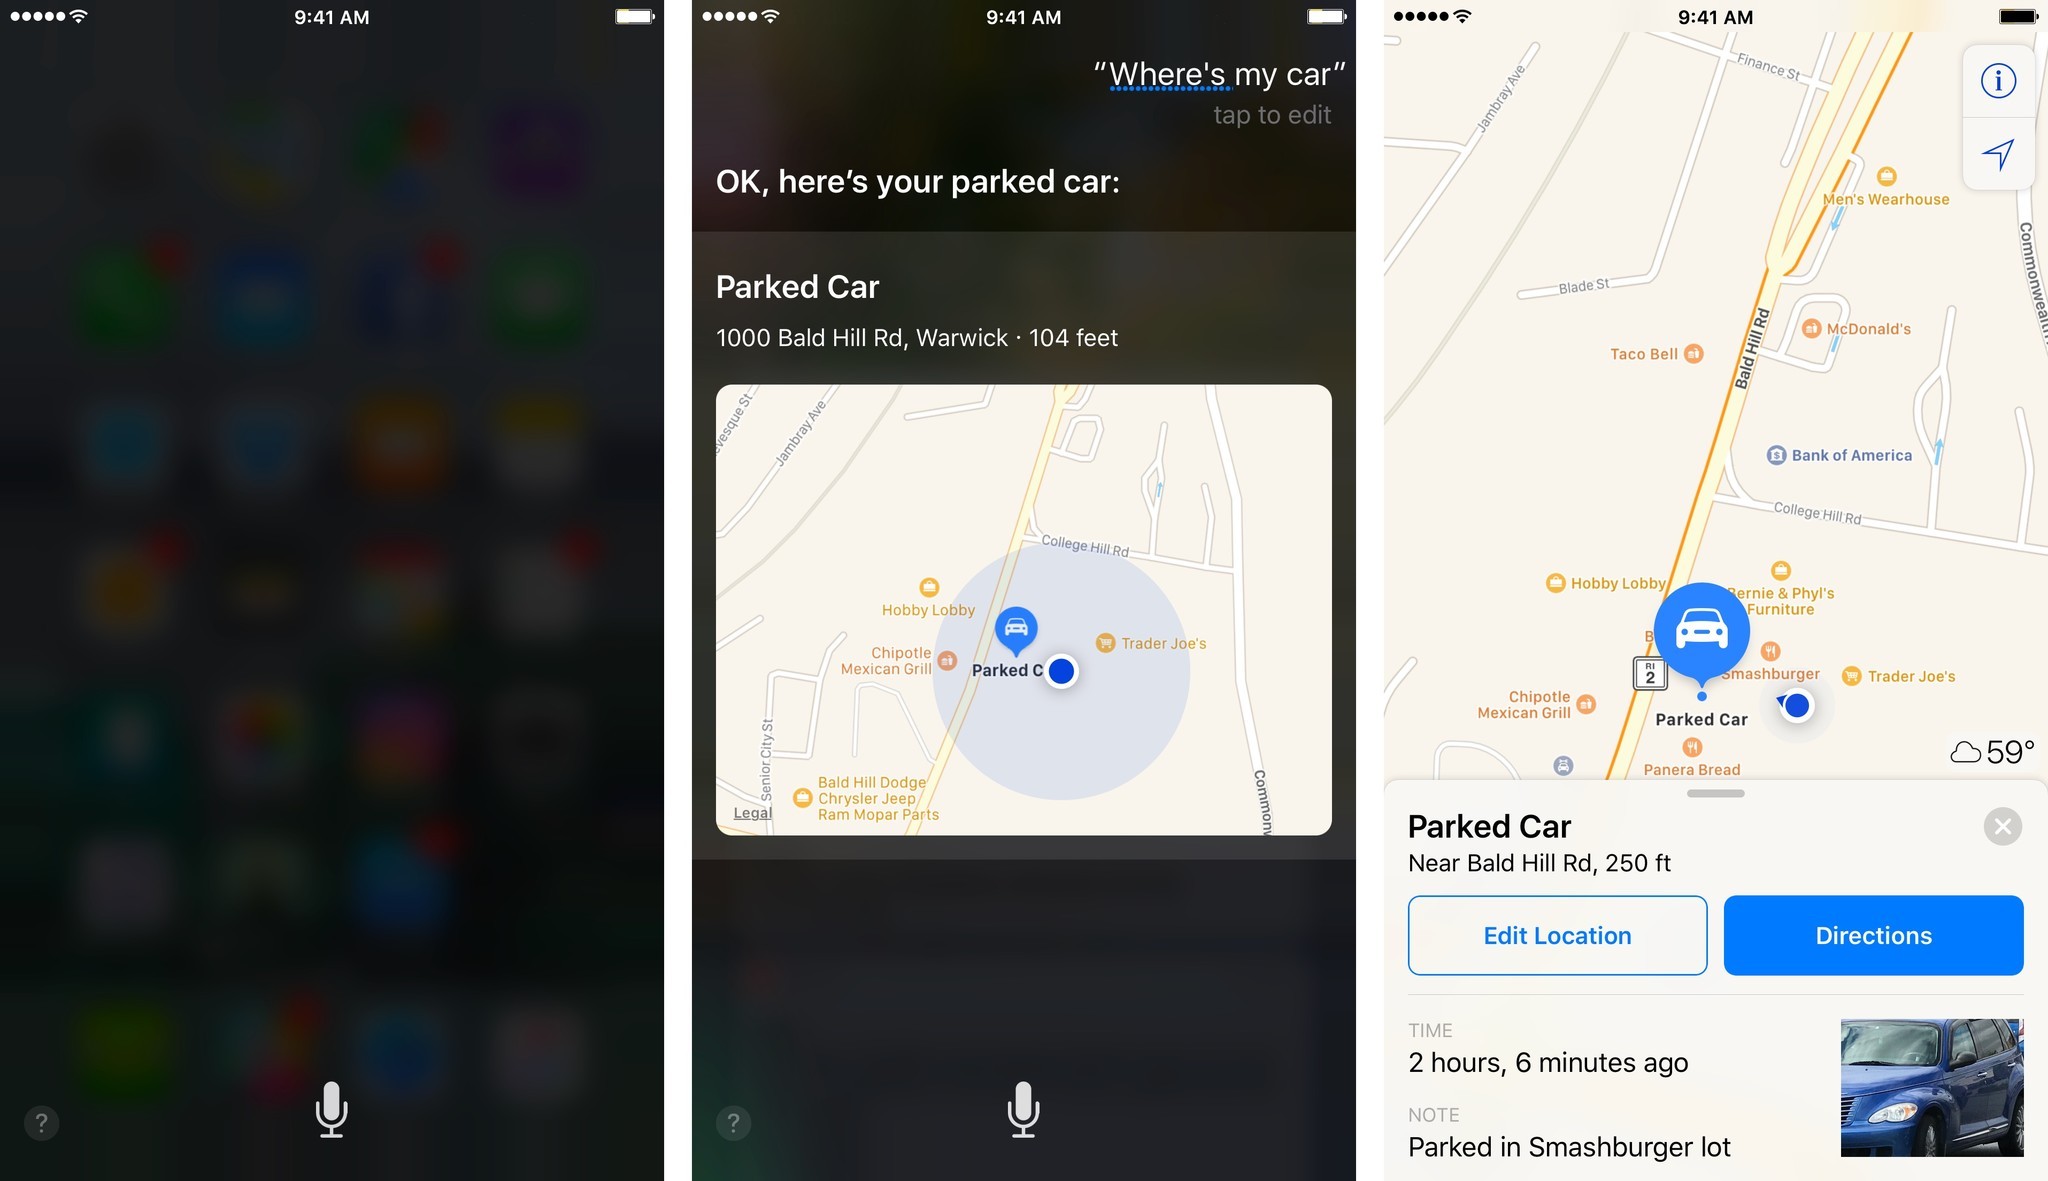 To find a parked car with Siri, say "Hey, Siri" then say "Where's My car?" Tap the parked car icon to see the location on the map. 